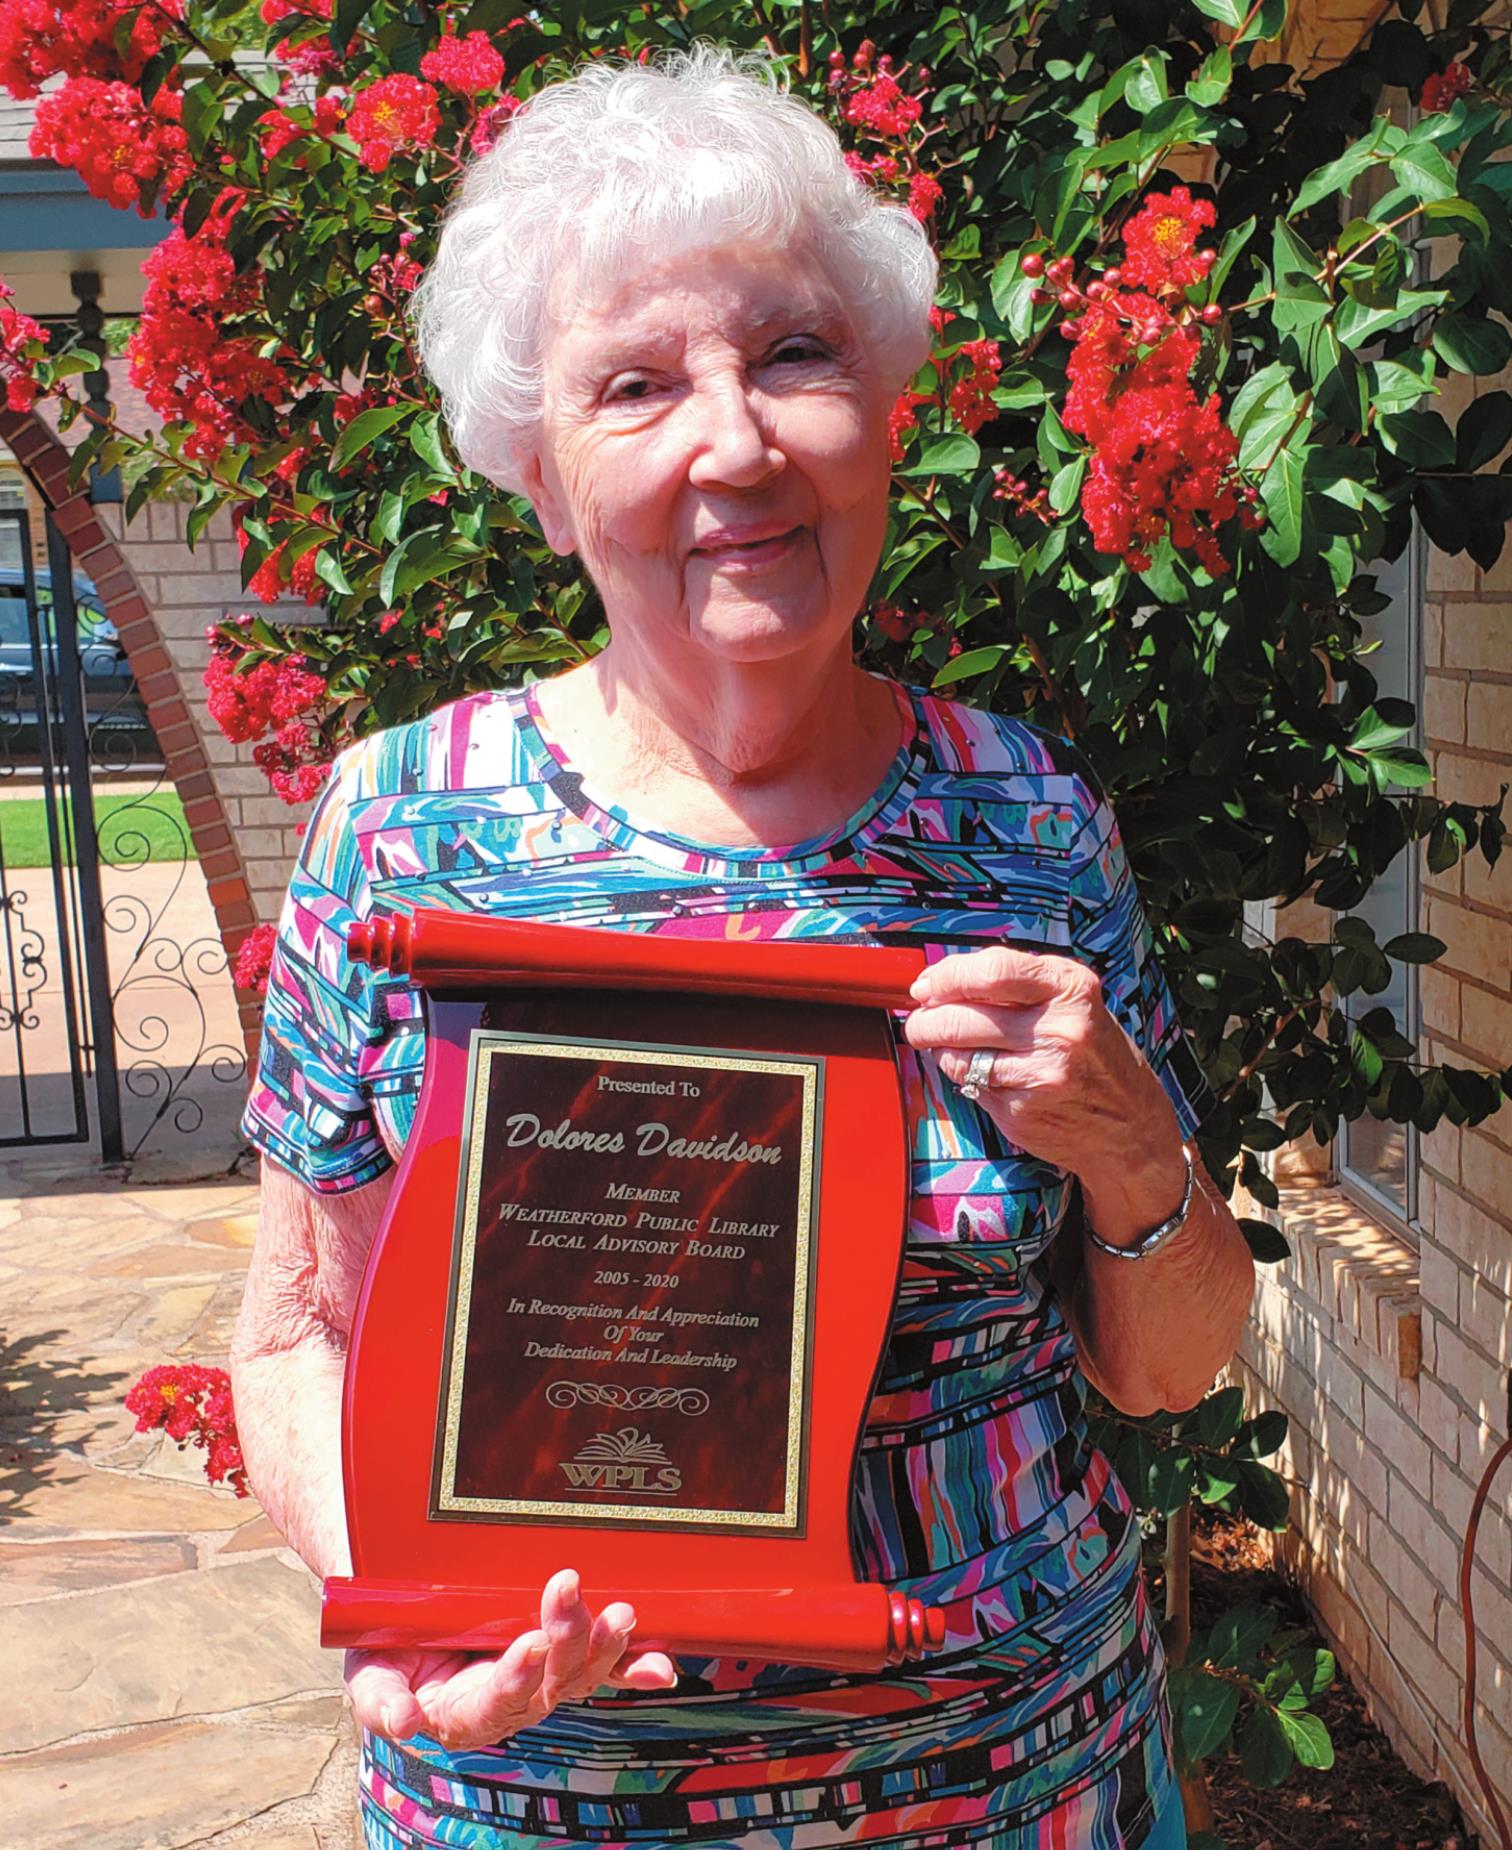 Leanna Cook/WDN Dolores Davidson shows off the plaque commemorating her service with the Weatherford Public Library Local Advisory Board.